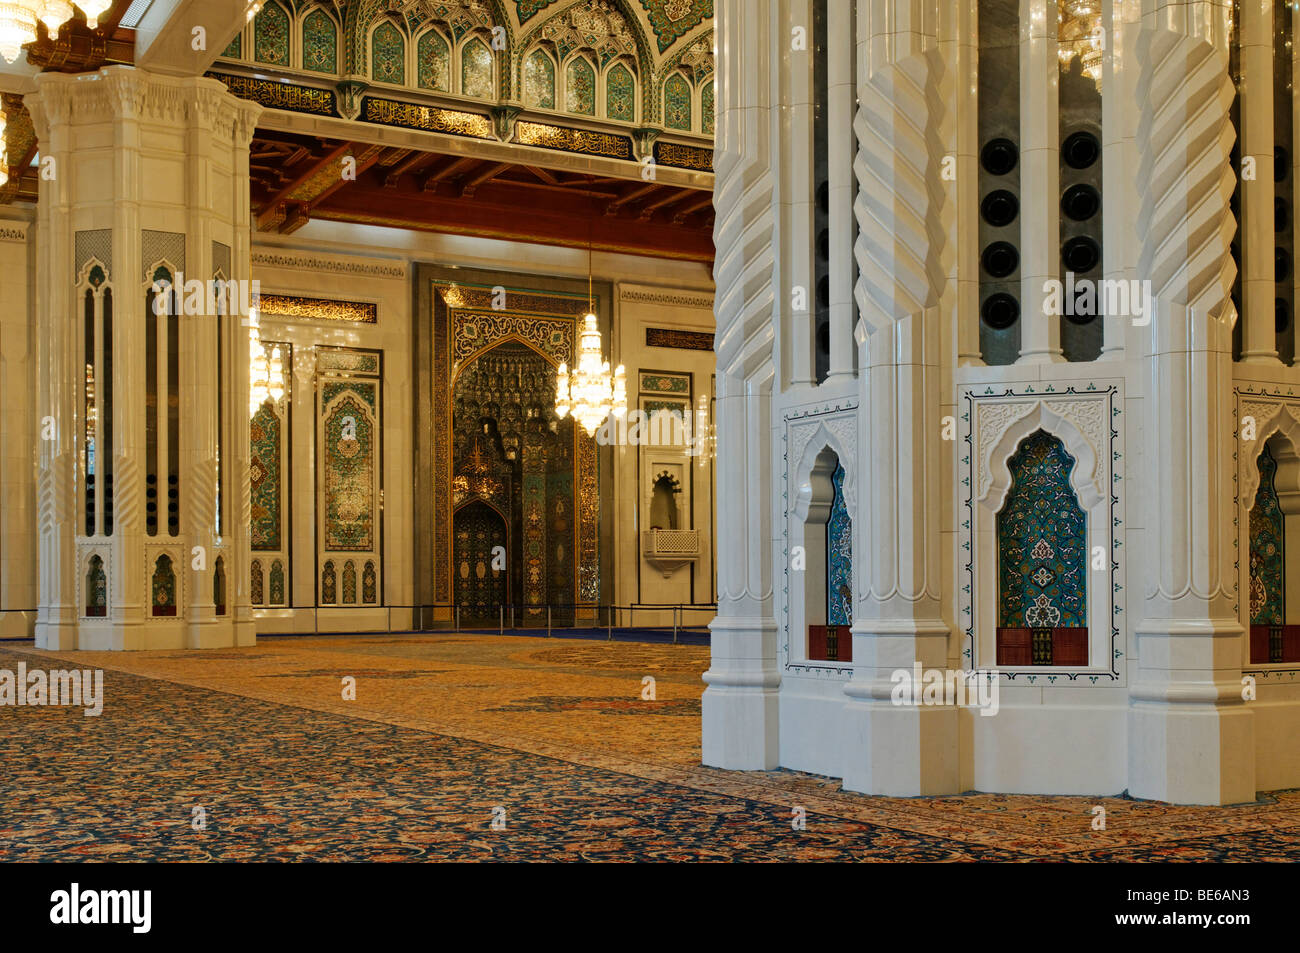 Central prayer hall at Sultan Qaboos Grand Mosque, Muscat, Sultanate of Oman, Arabia, Middle East Stock Photo